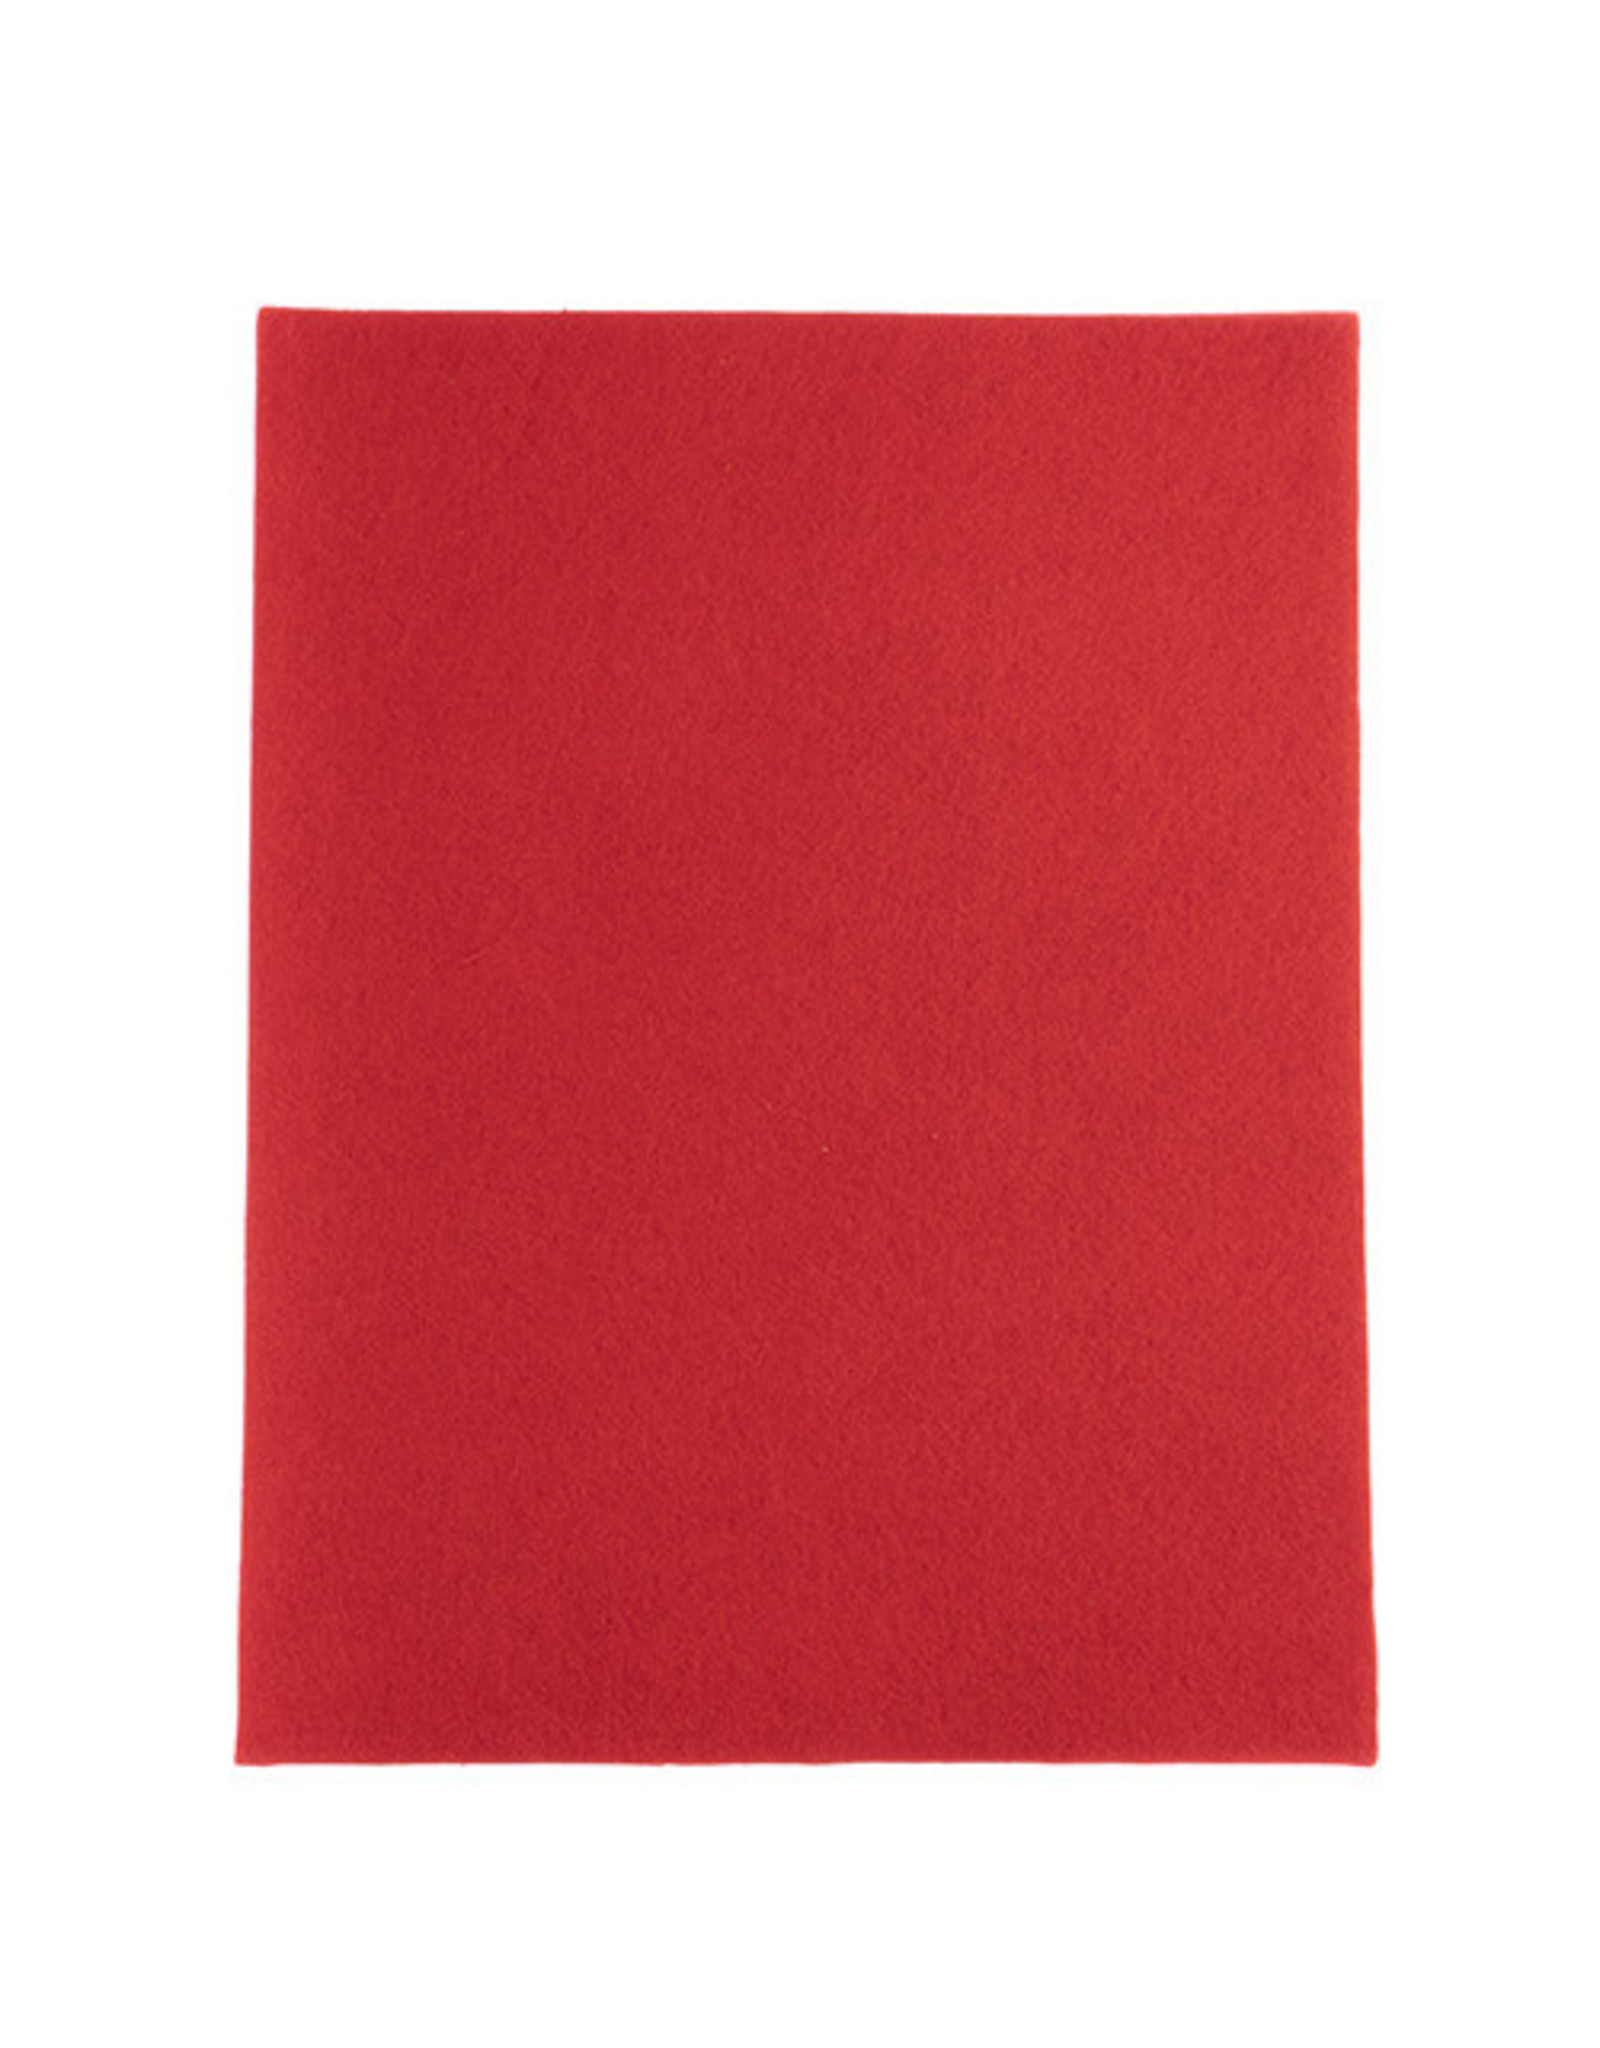 Felt Beading Foundation Red 1.5mm thick 8.5x11"